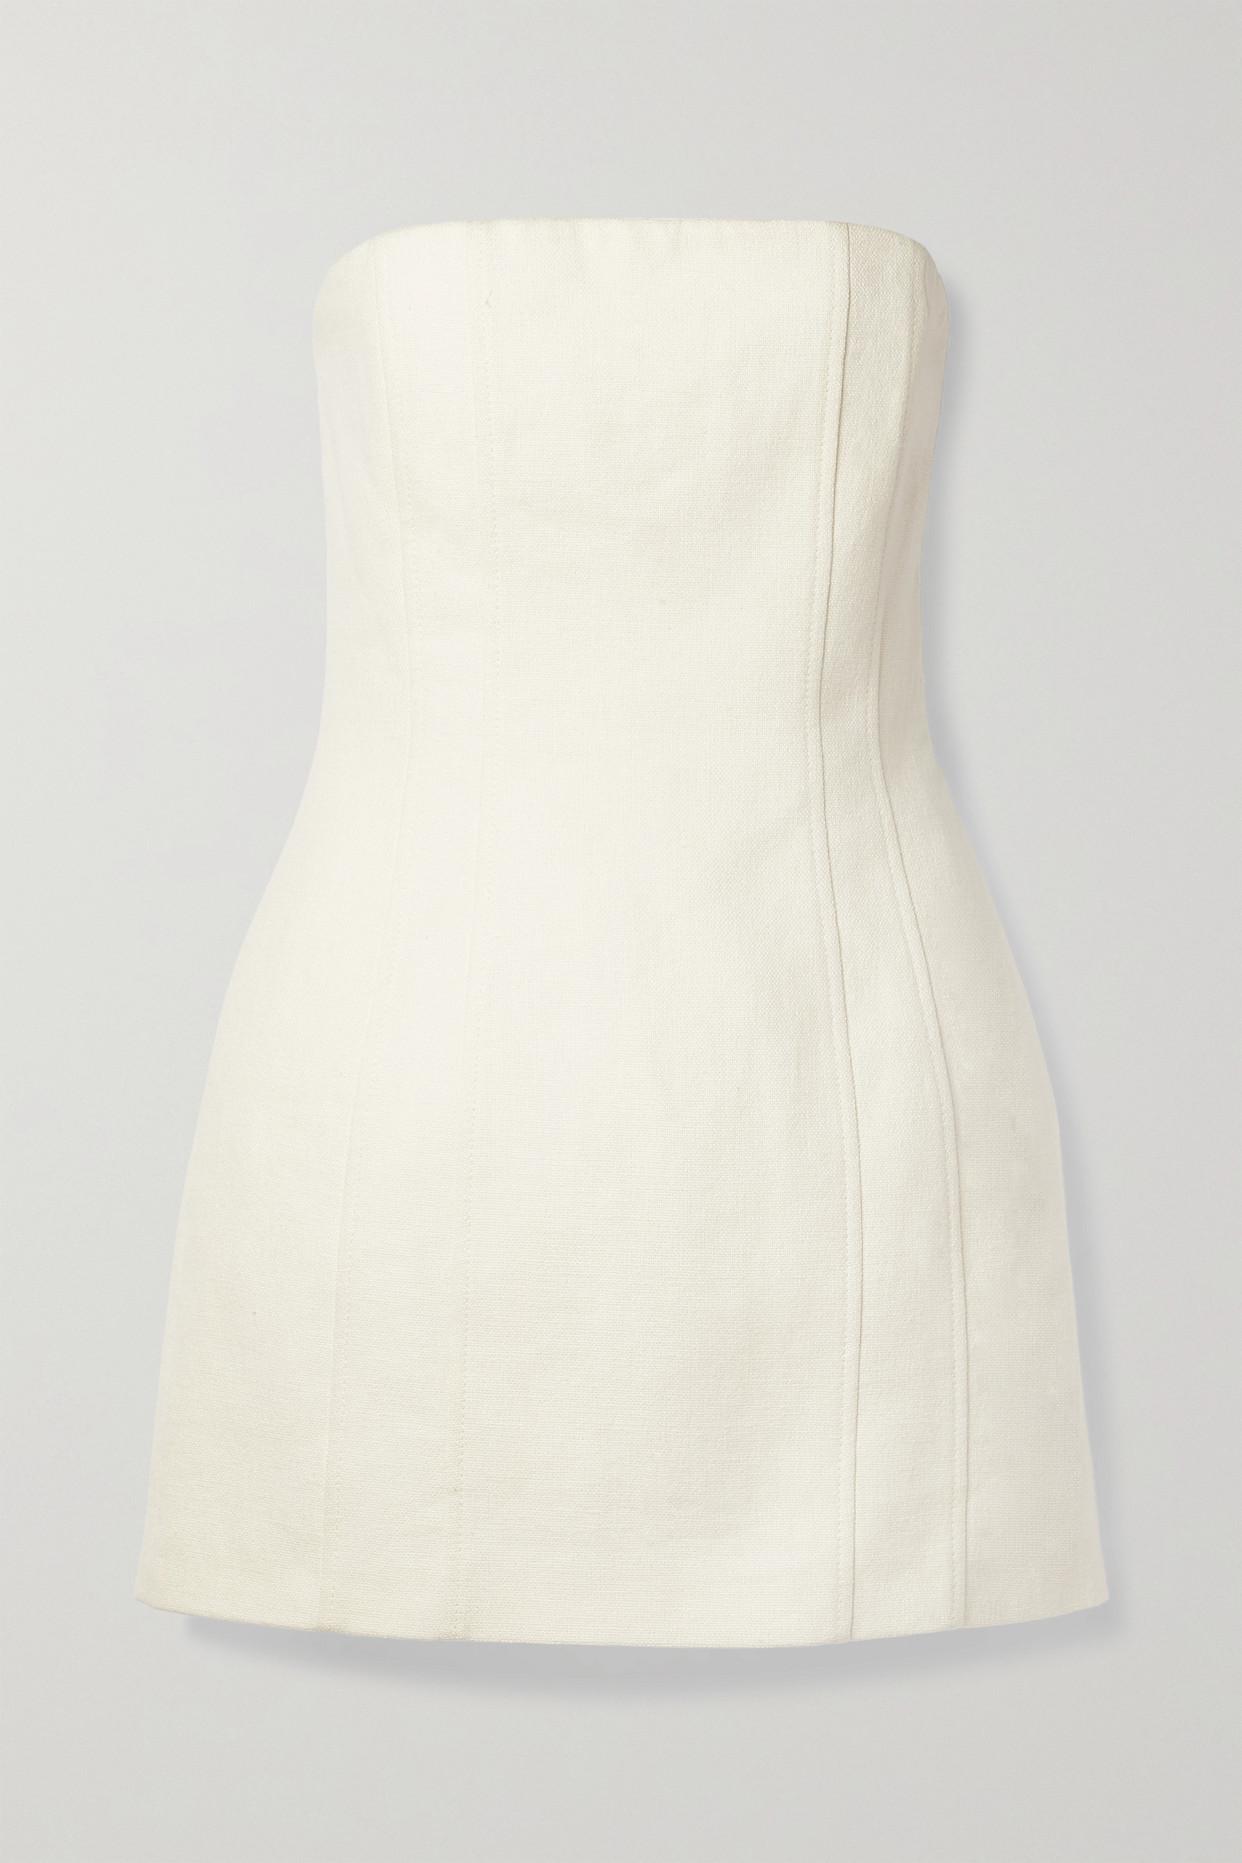 A.L.C. Elsie Strapless Linen And Cotton-blend Mini Dress in